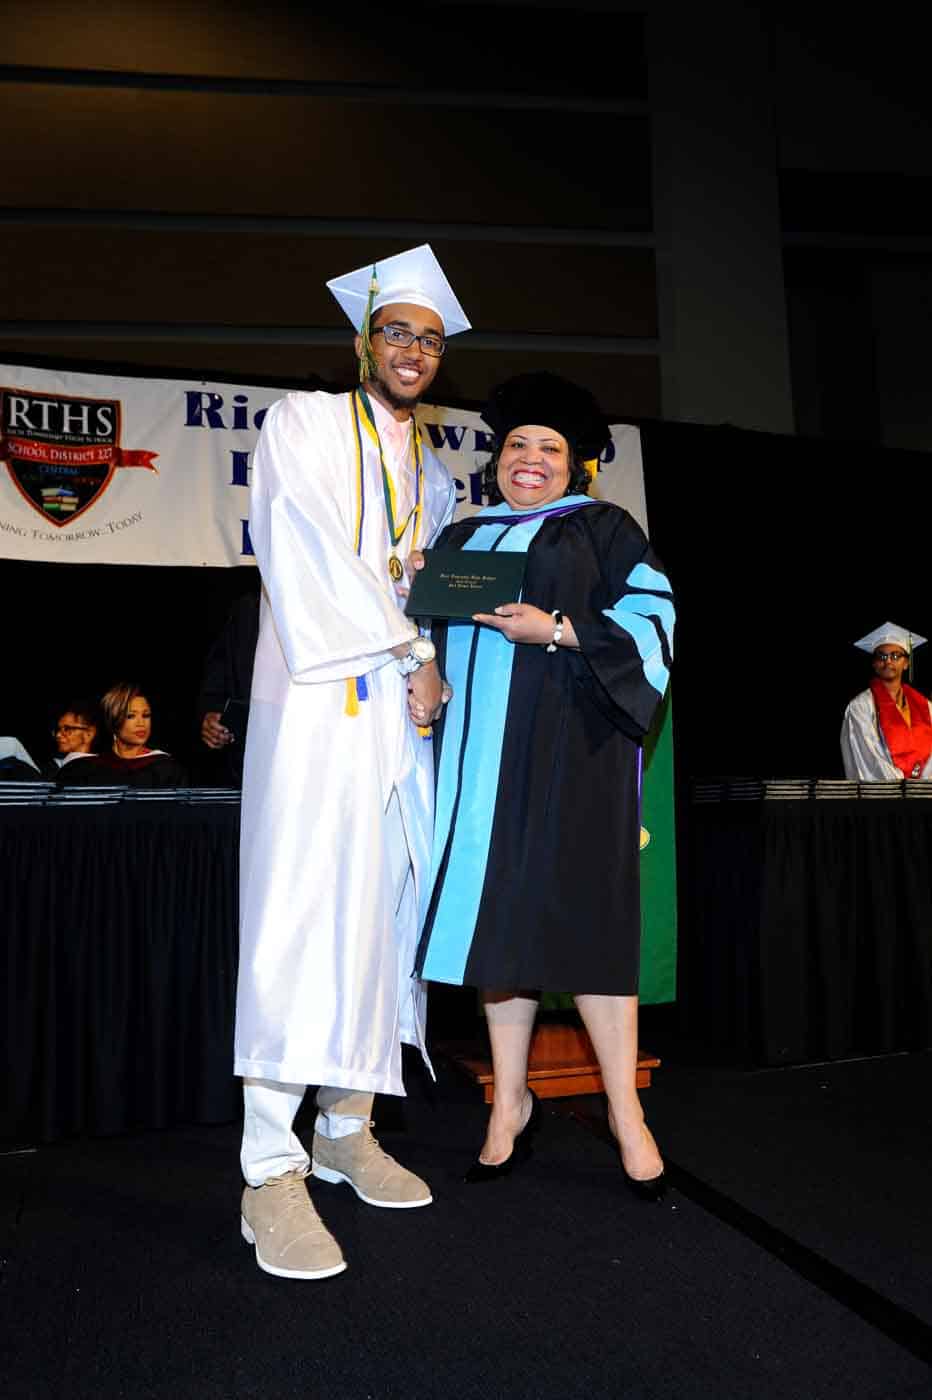 guy and lady posing with diplomas